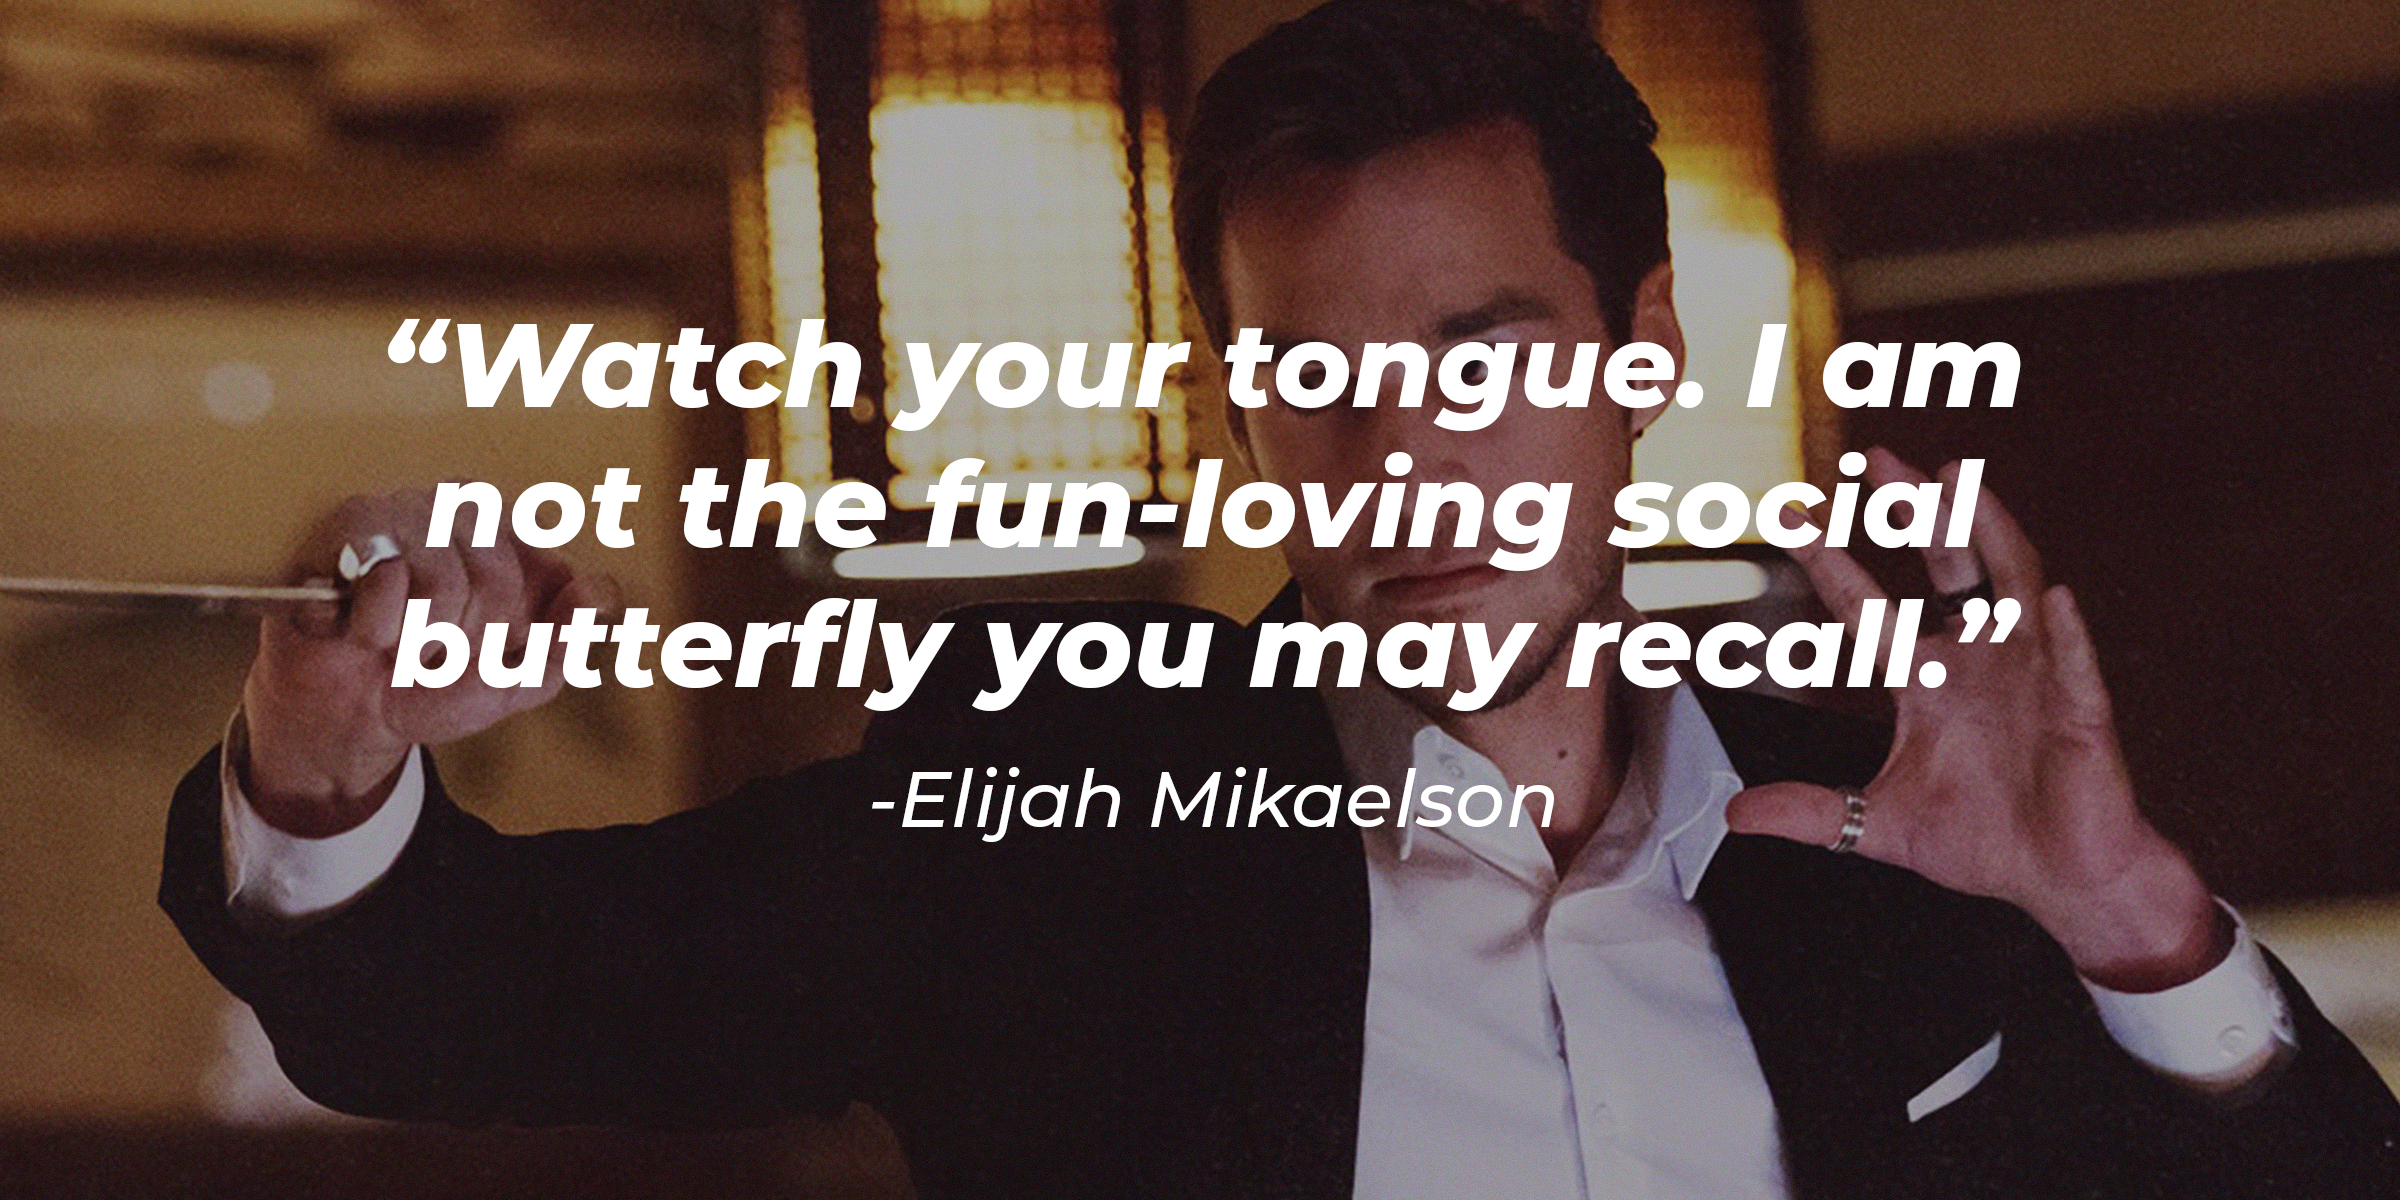 An image of Elijah Mikaelson with his quote: "Watch your tongue. I am not the fun-loving social butterfly you may recall." | Source: facebook.com/thevampirediaries